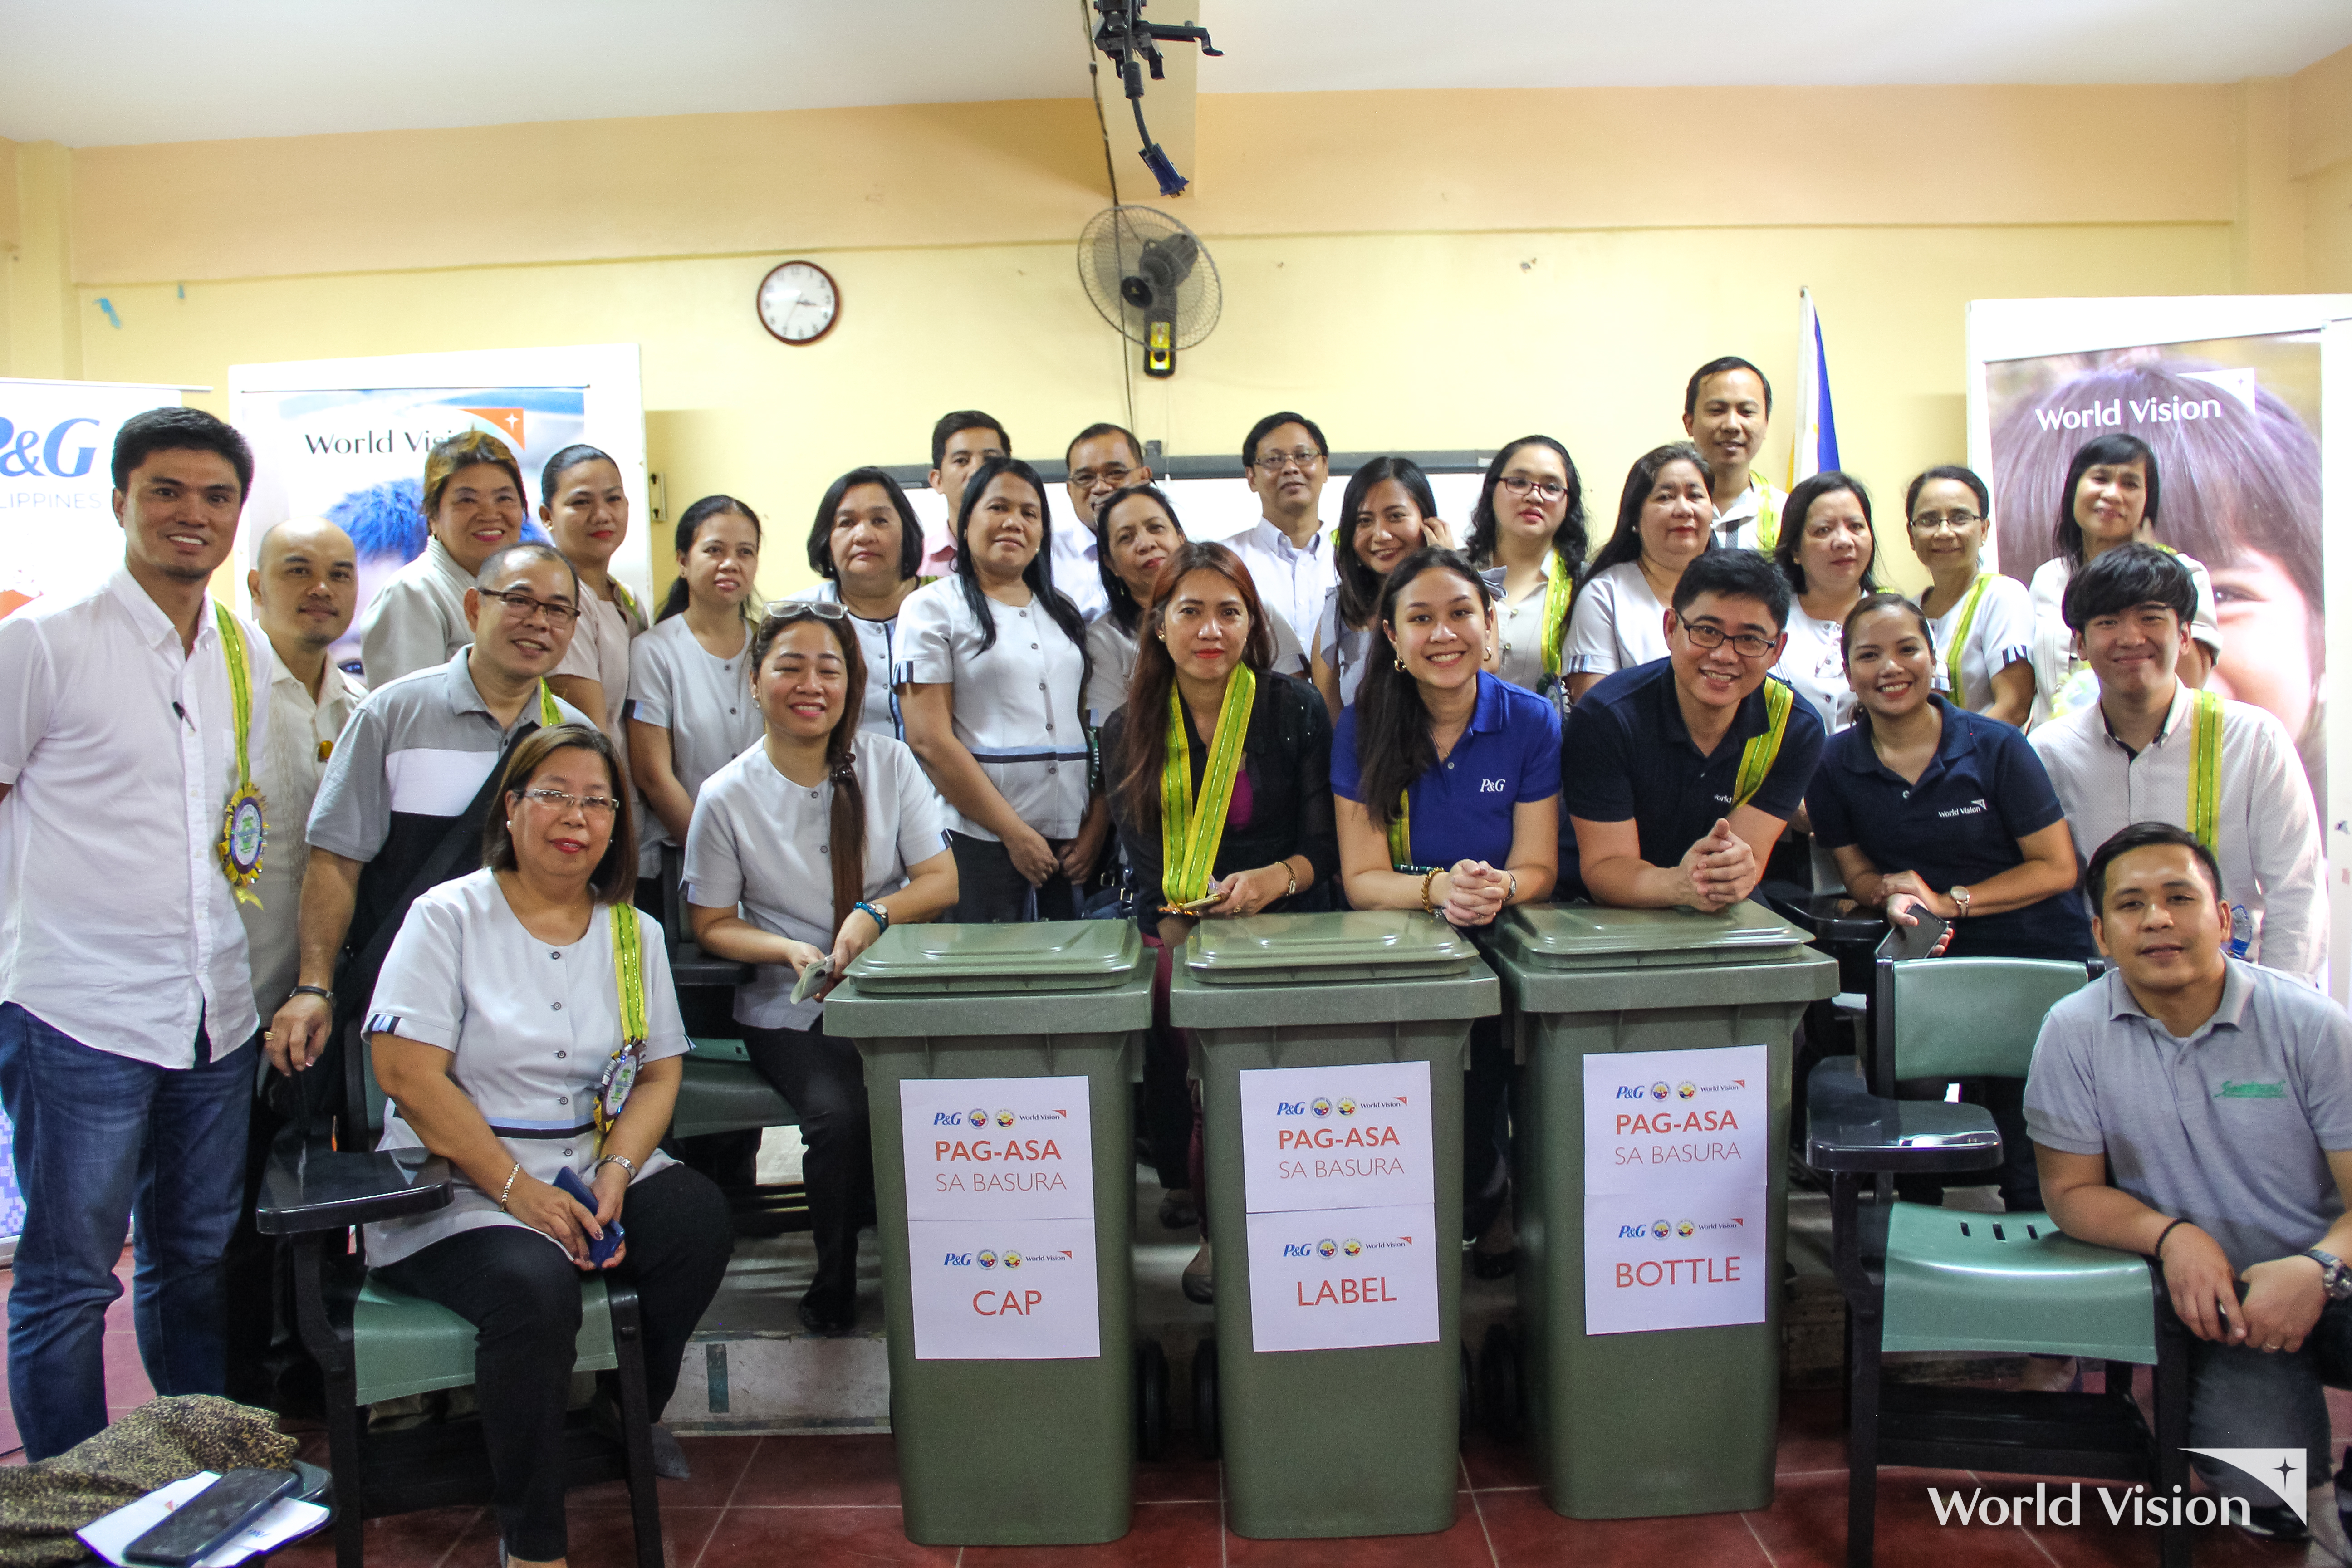 World Vision and Procter & Gamble (P&G) Philippines together with Department of Education Malabon Division Office launched the “Pag-asa sa Basura” campaign